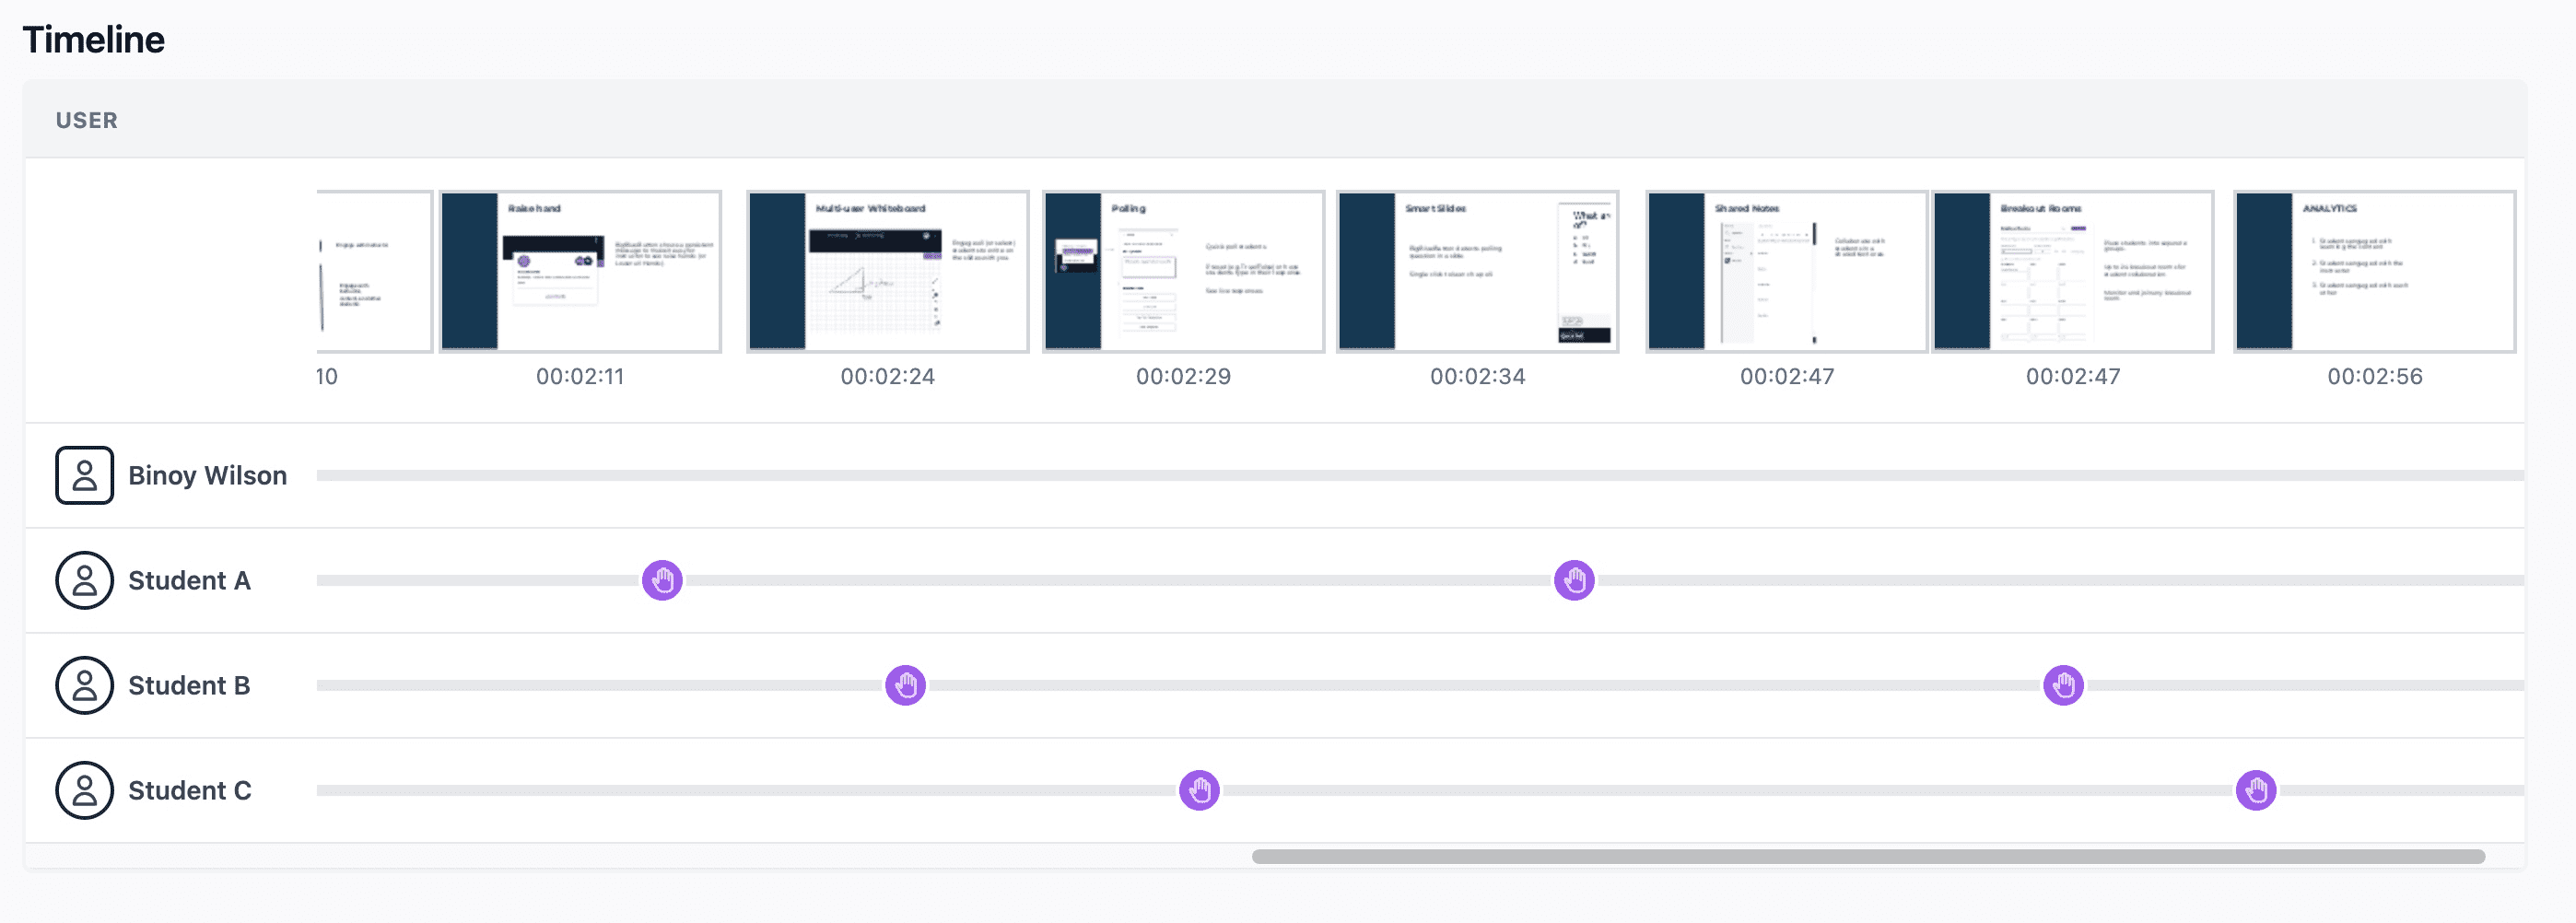 Timeline view of learning analytics dashboard